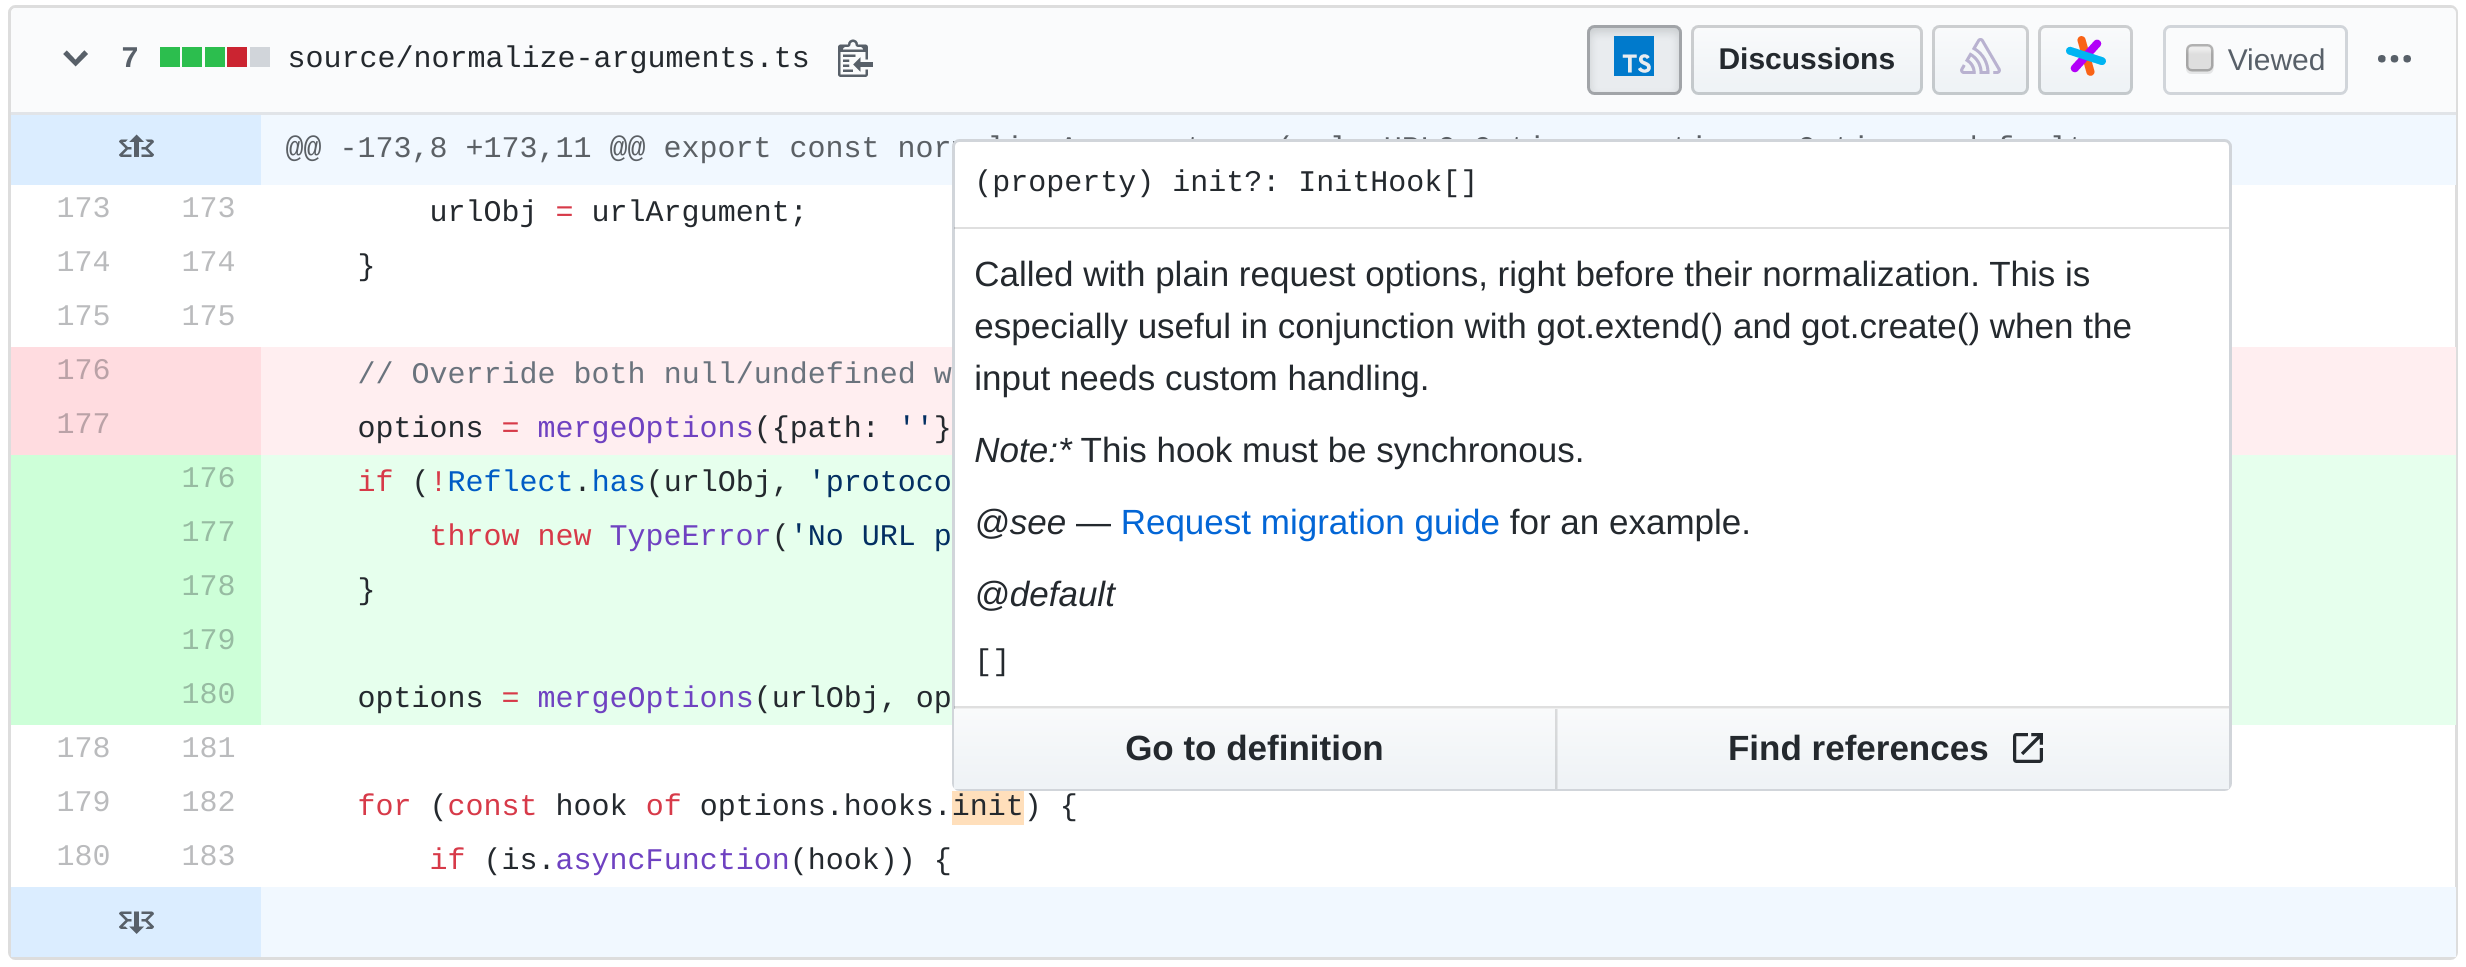 Github pull request demonstrating code navigation to help review code.